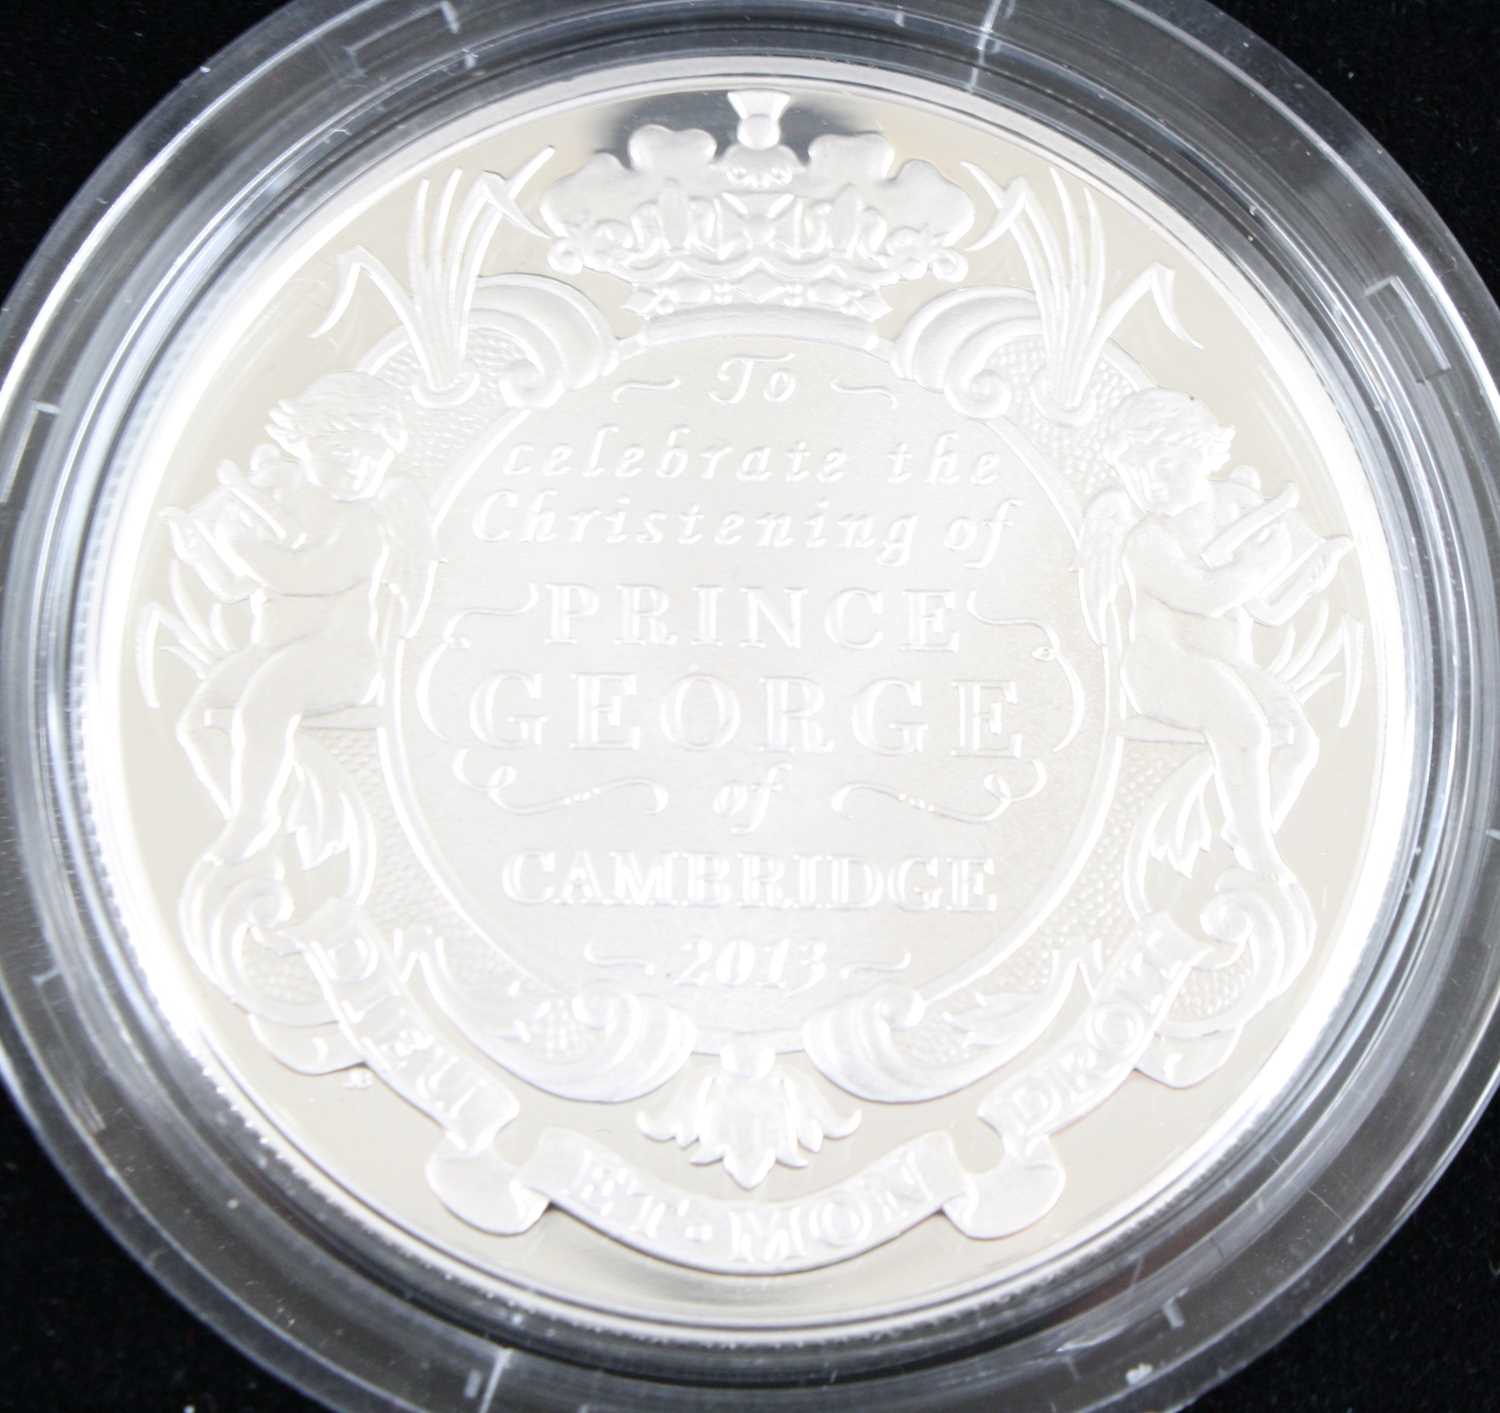 United Kingdom, The Royal Mint, The Christening of H.R.H. Prince George of Cambridge, 2013 Silver - Bild 2 aus 2